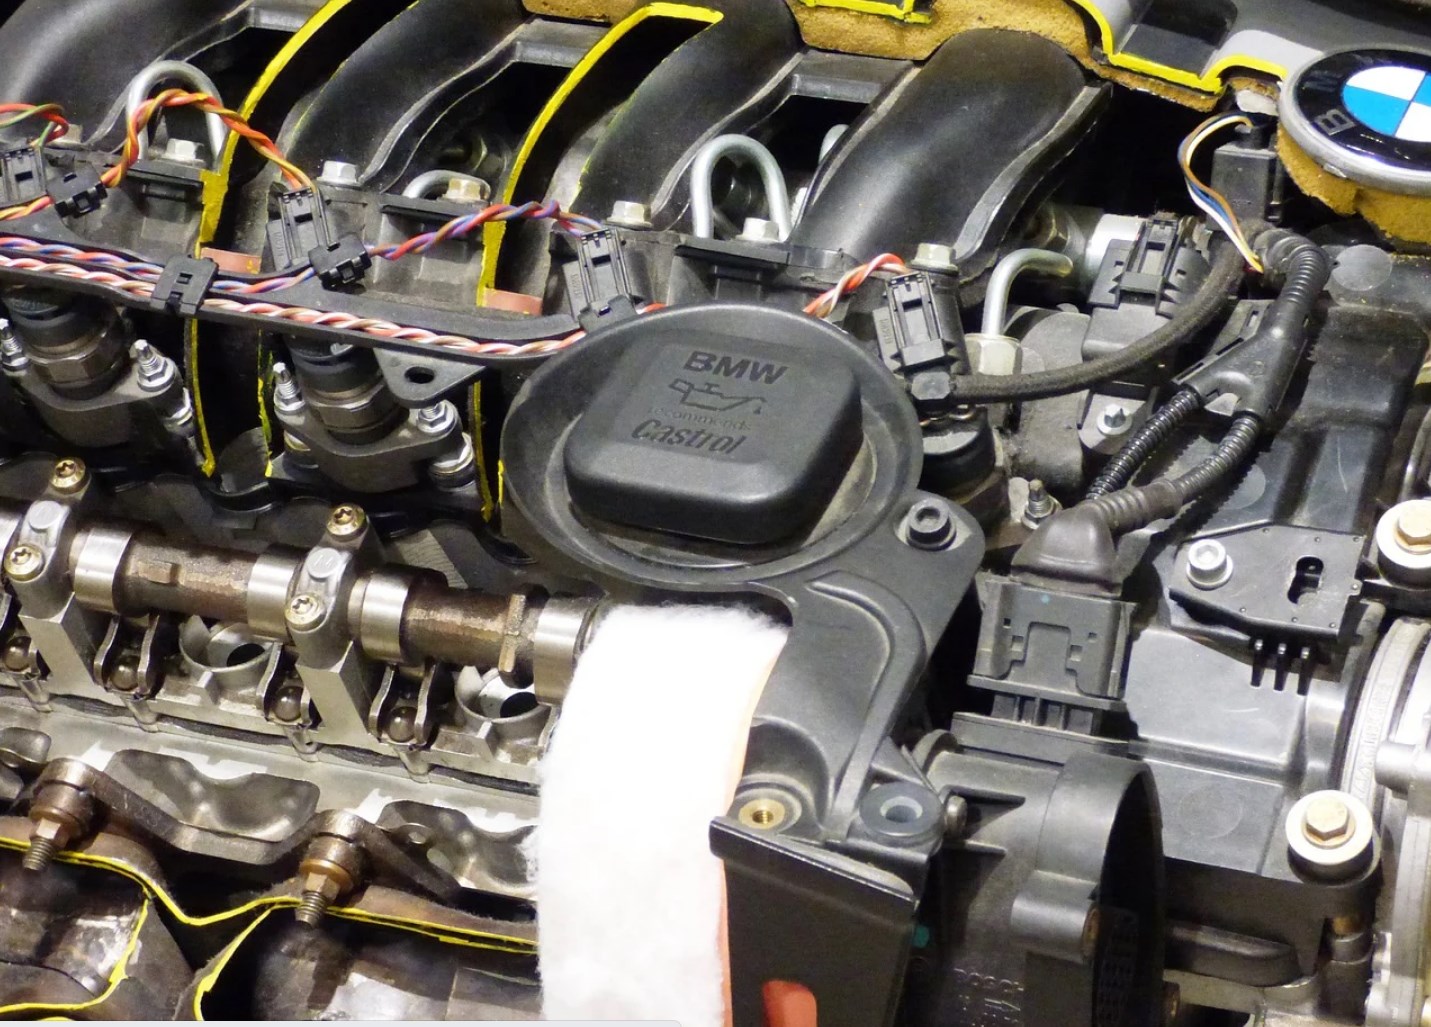 How Much Does It Cost To Replace A Valve Cover Gasket?